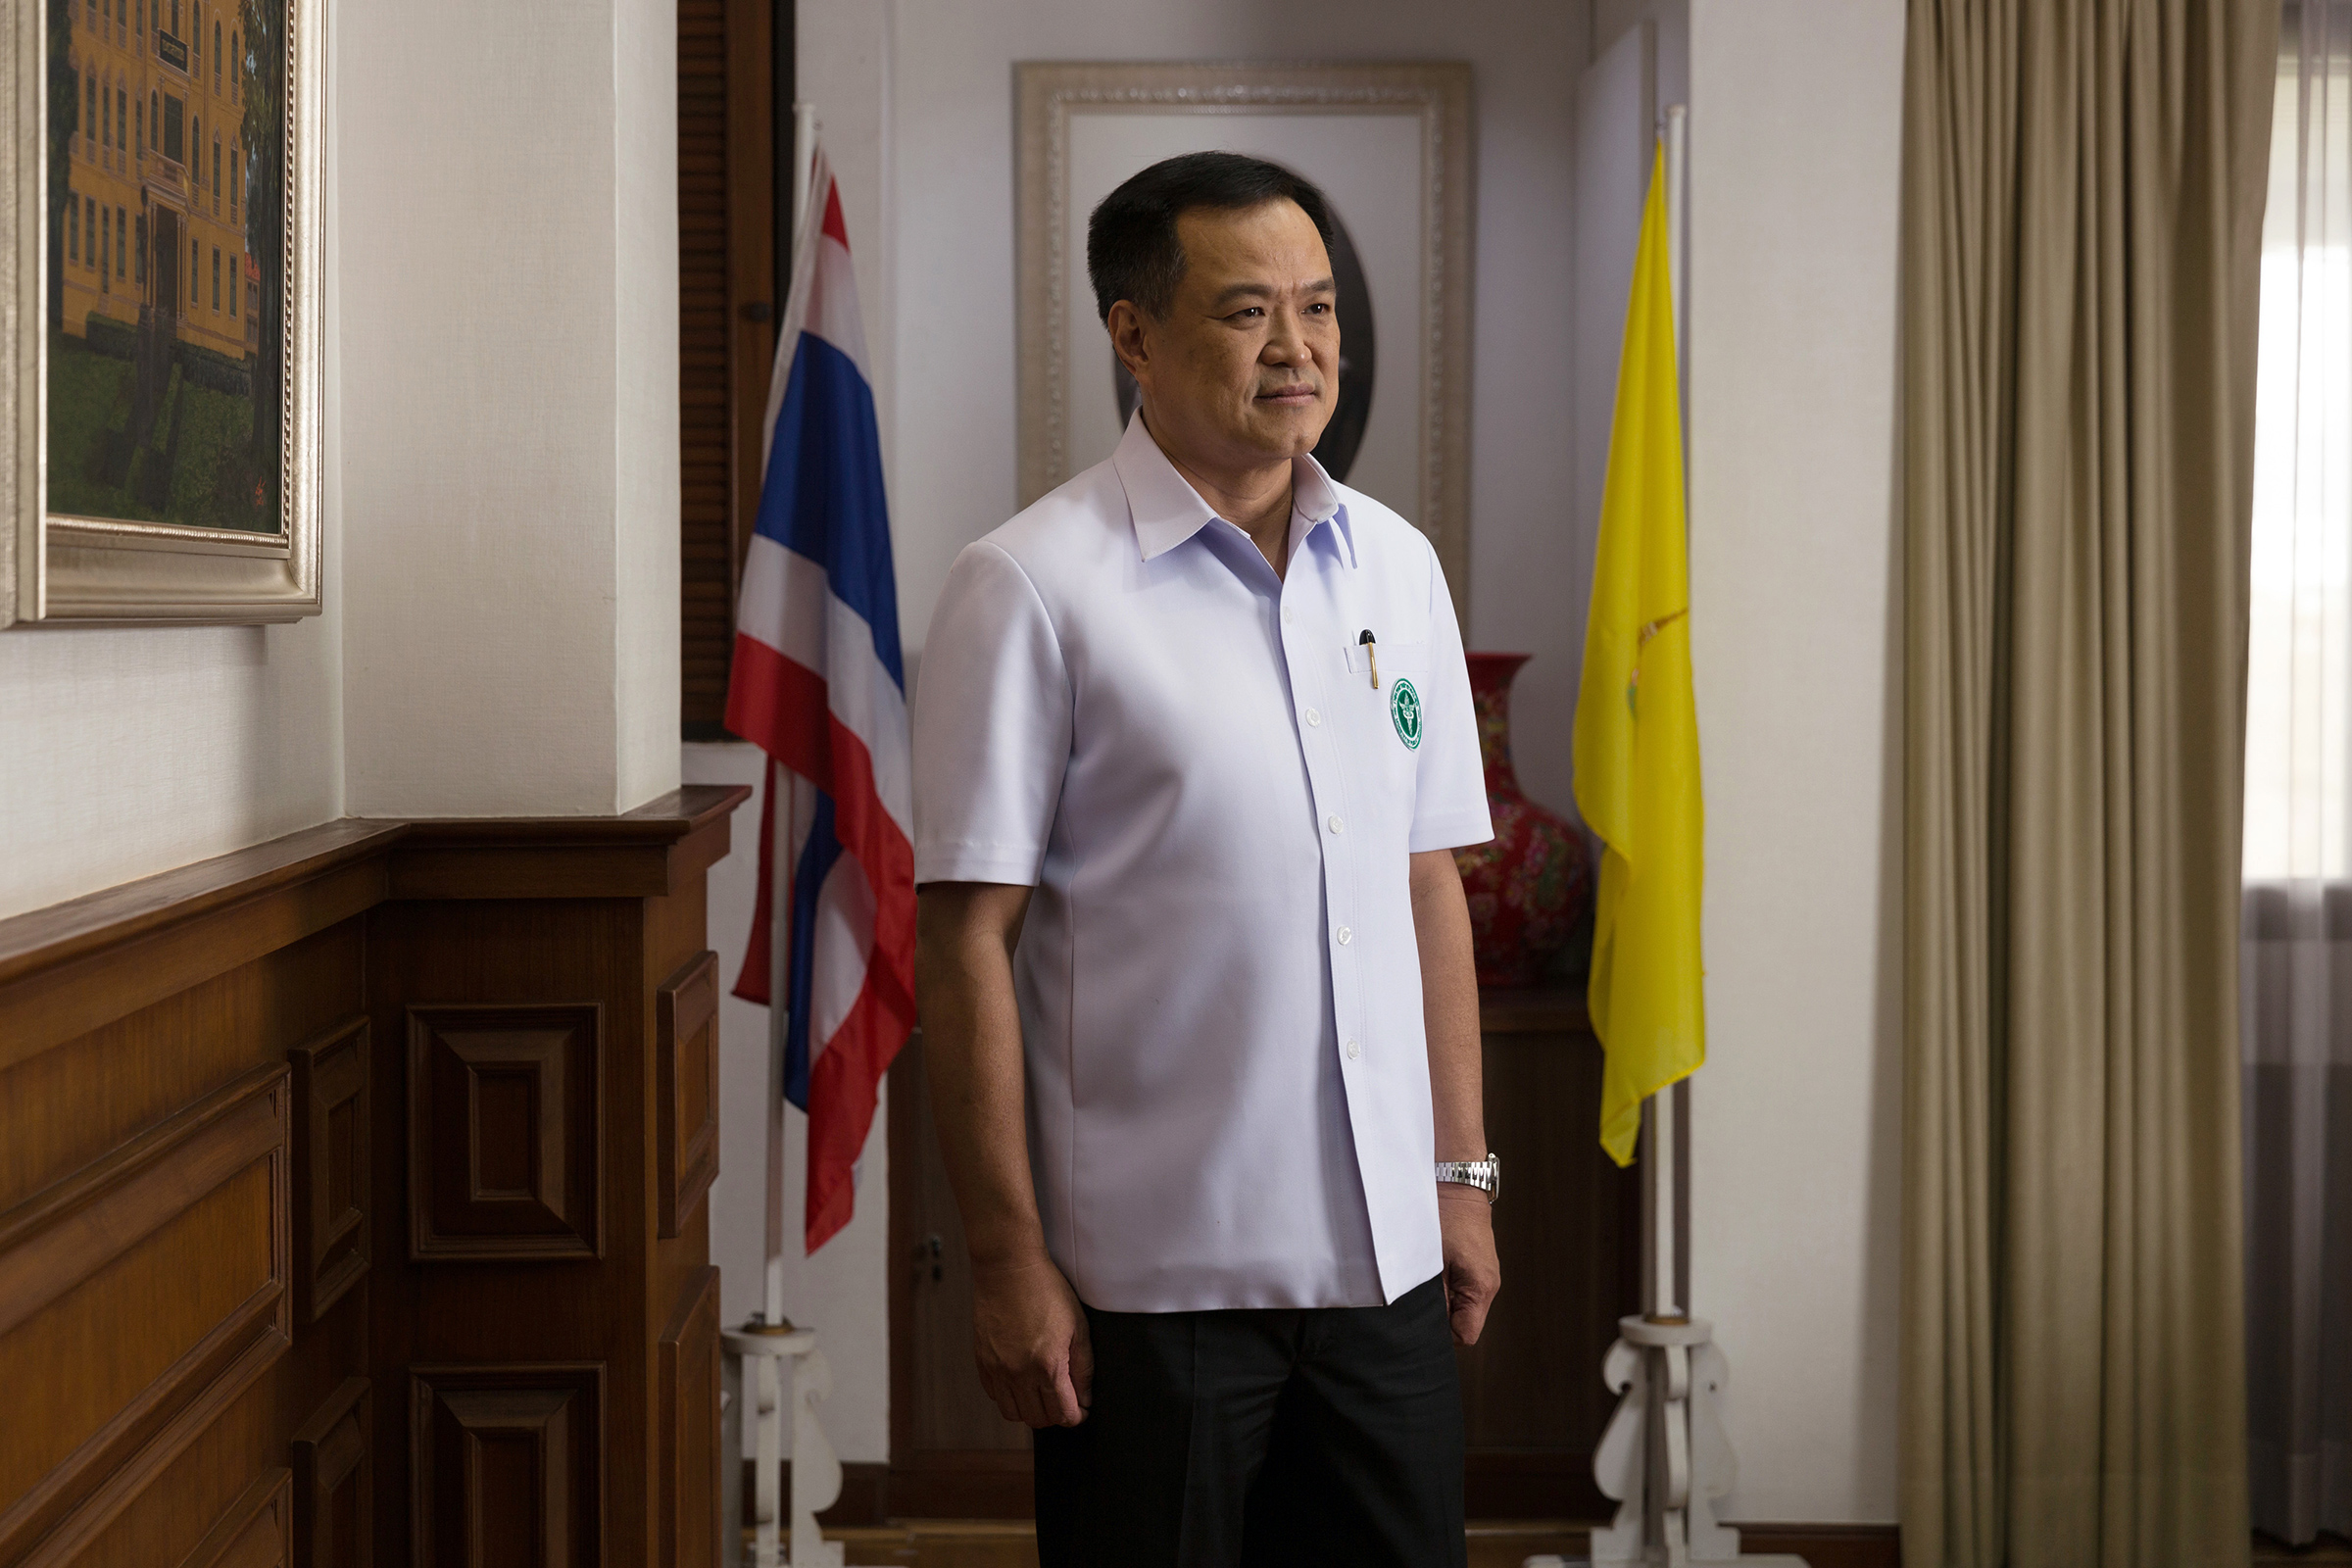 Anutin Charnvirakul, Thailand's deputy prime minister and health minister, at his office in Bangkok on Feb. 8, 2021. (Luke Duggleby—Bloomberg/Getty Images)